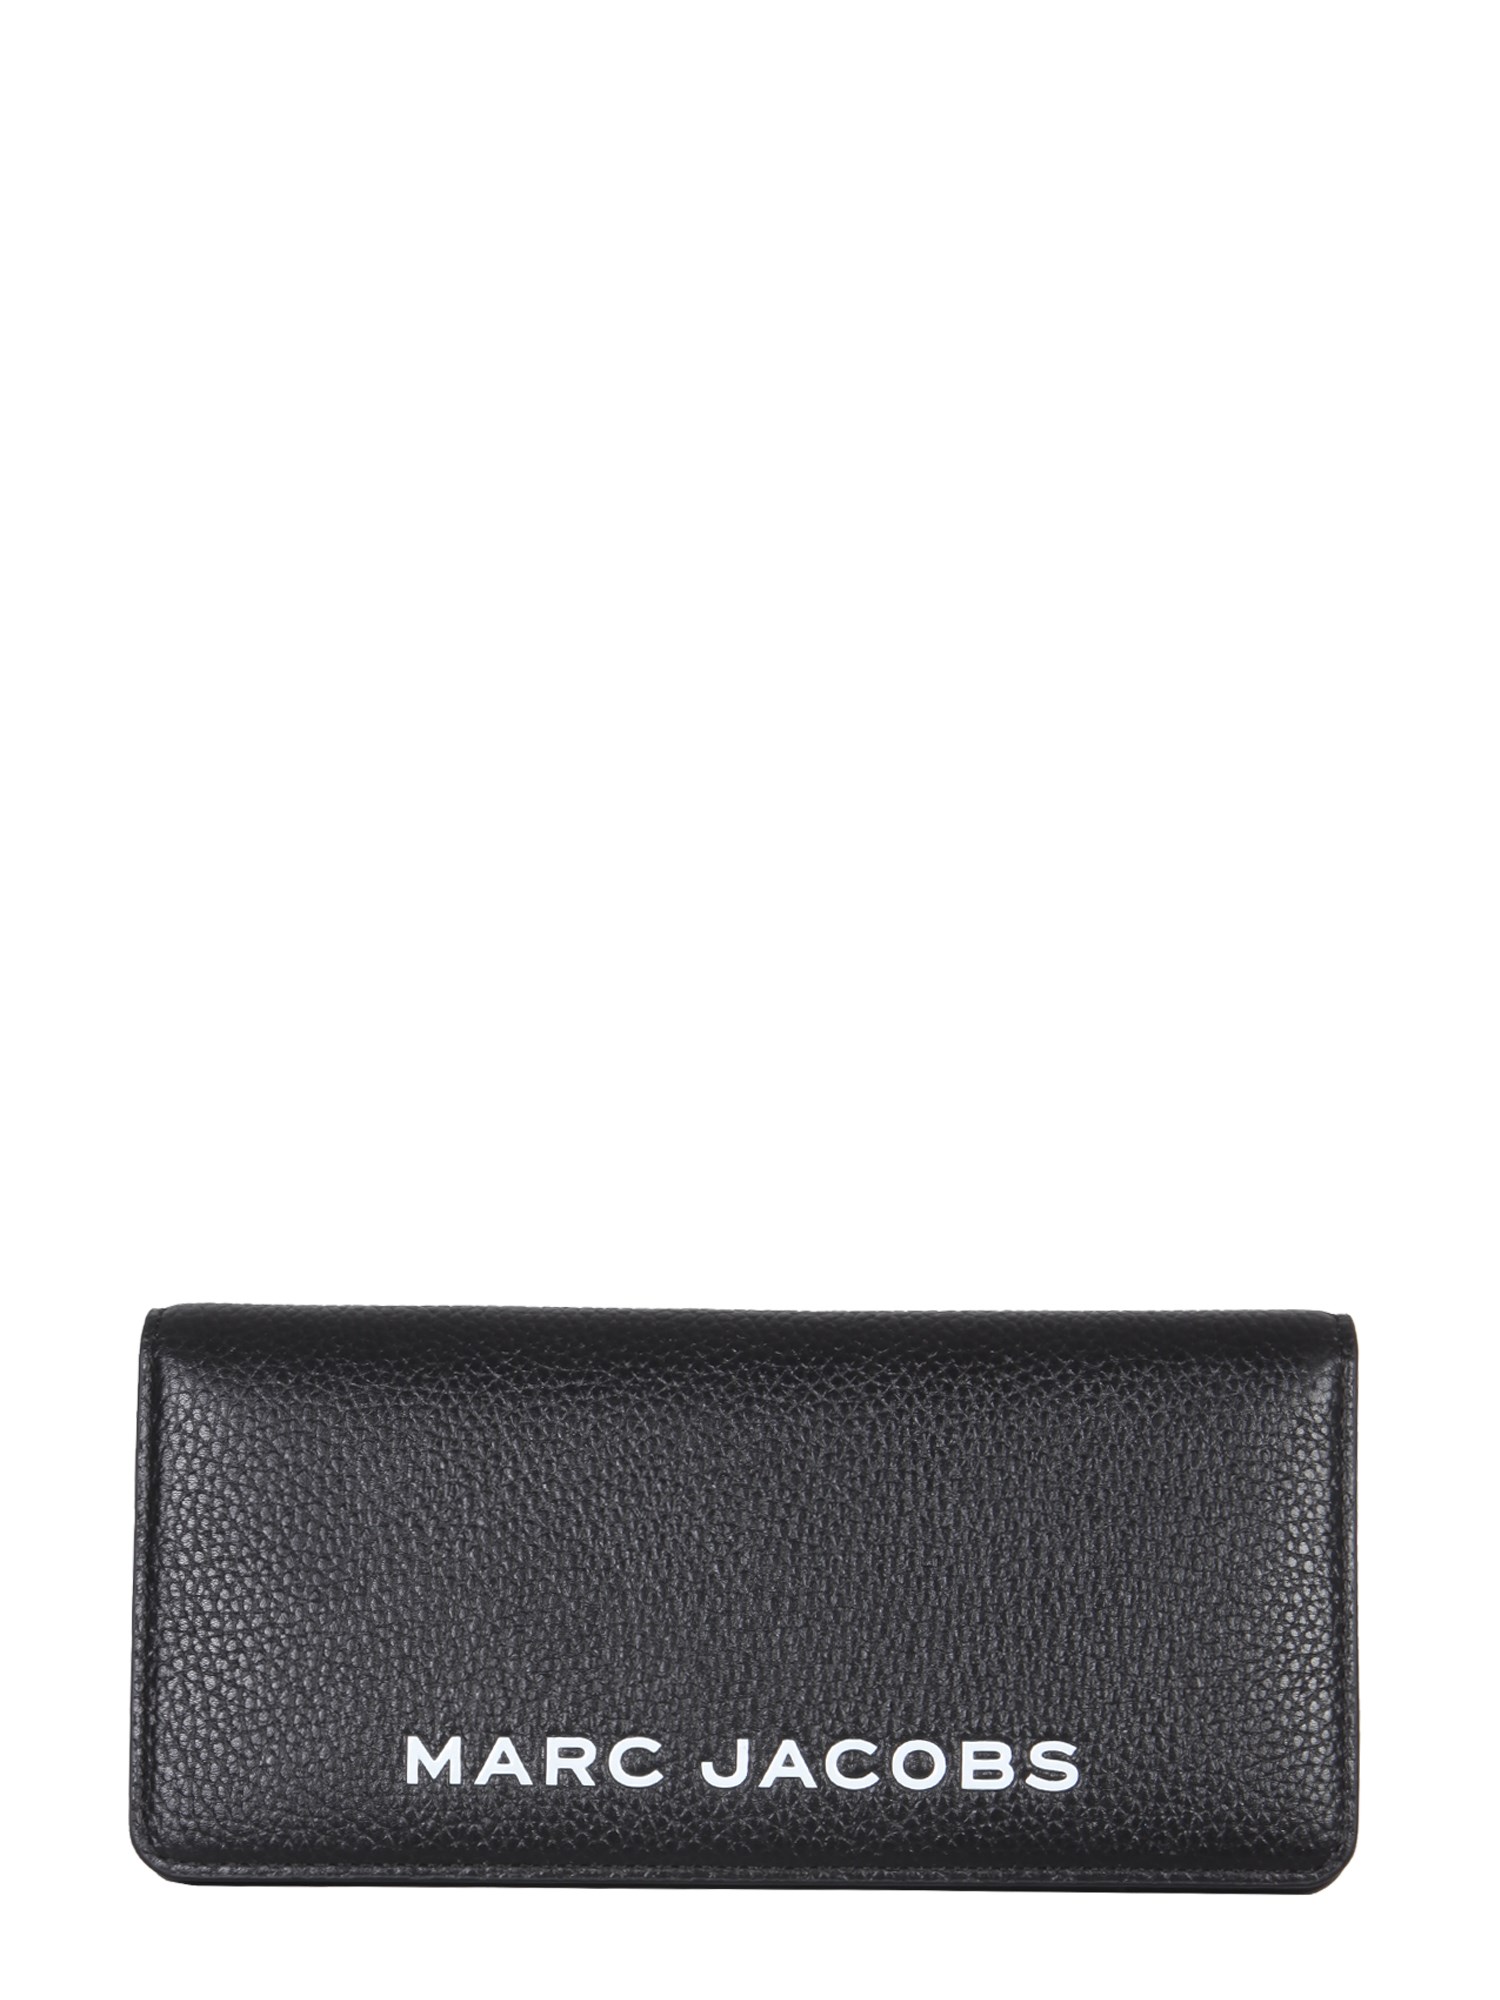 marc jacobs the bold open face wallet